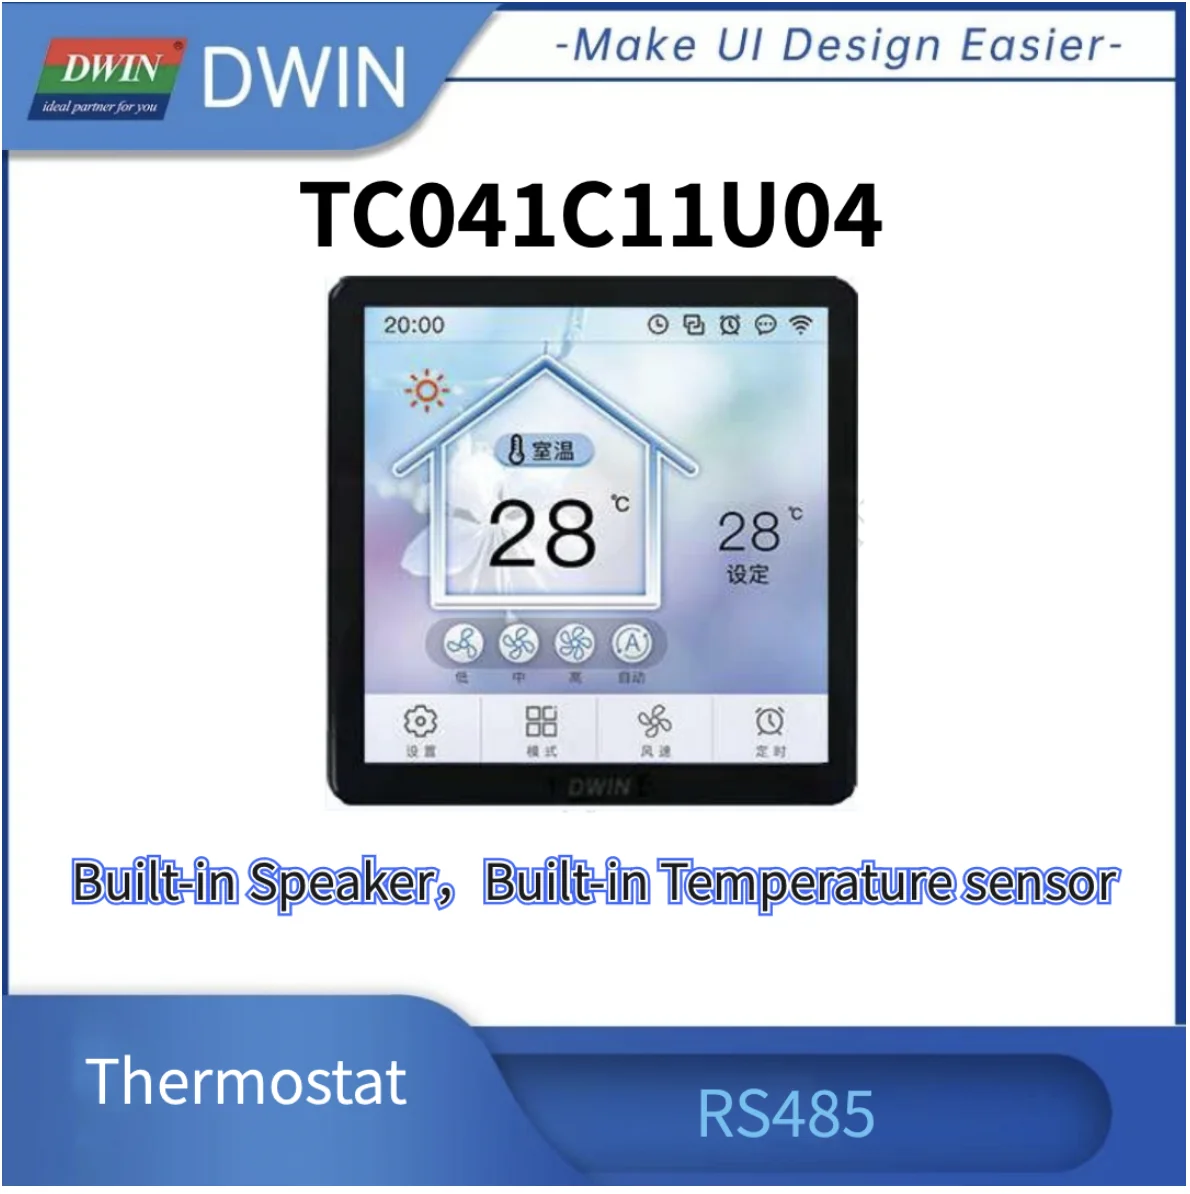 DWIN 4.1 Inch LCD Display Thermostat UART Serial 720*720  Smart Home Wall Mounted HMI IOT Touch Panel